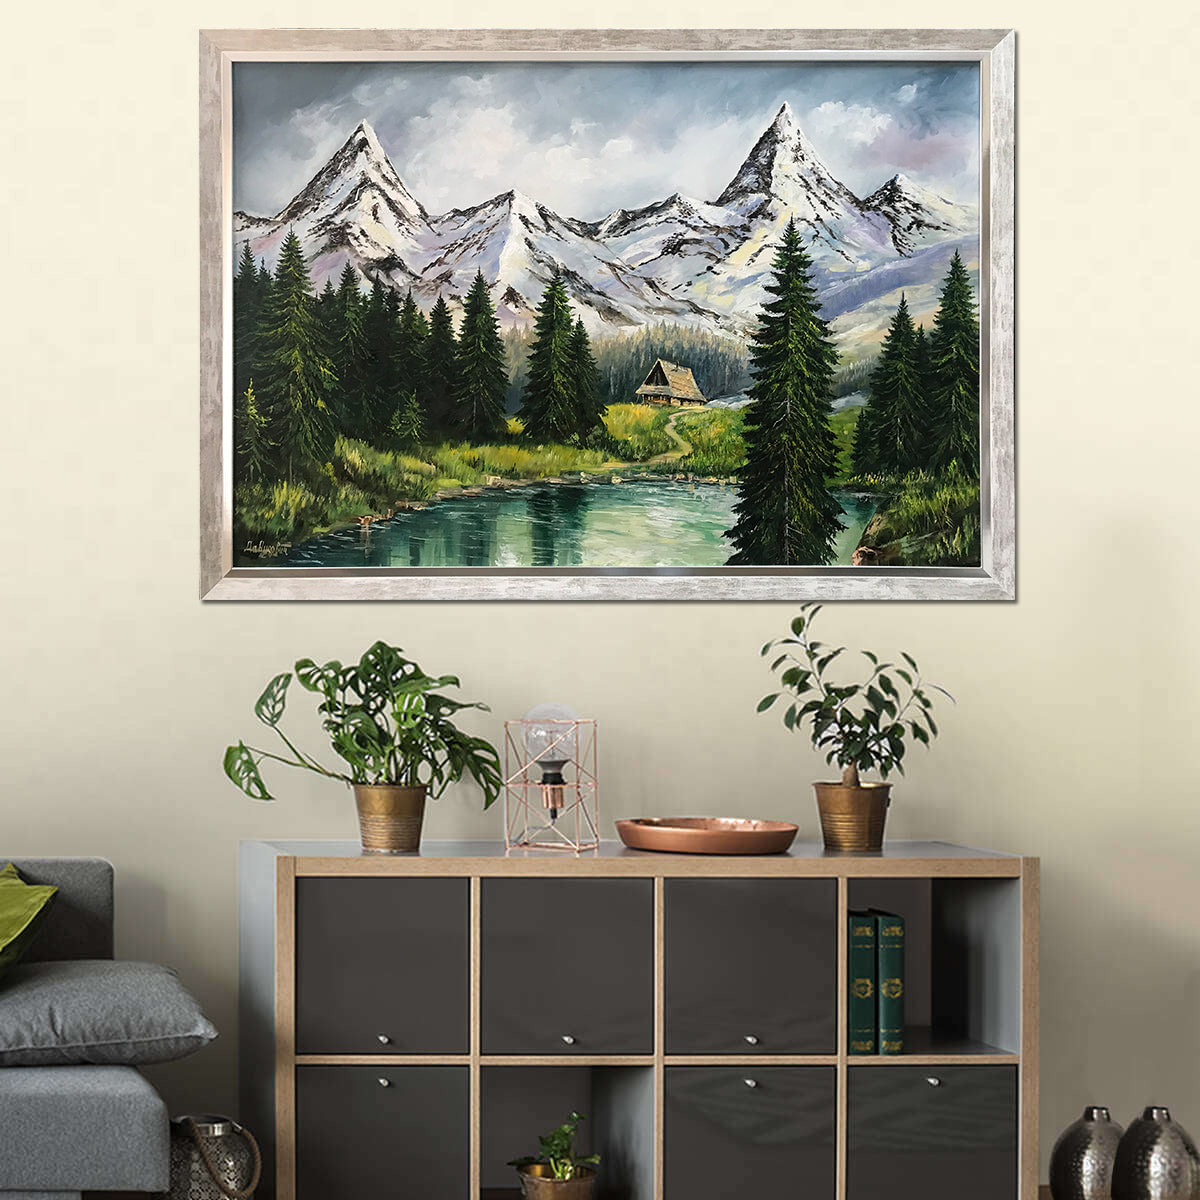 Colorado Mountain Painting on Canvas Emerald Lake Painting Snowy Mountain Wall Art Mountains Landscape Oil Painting Framed Nature Art